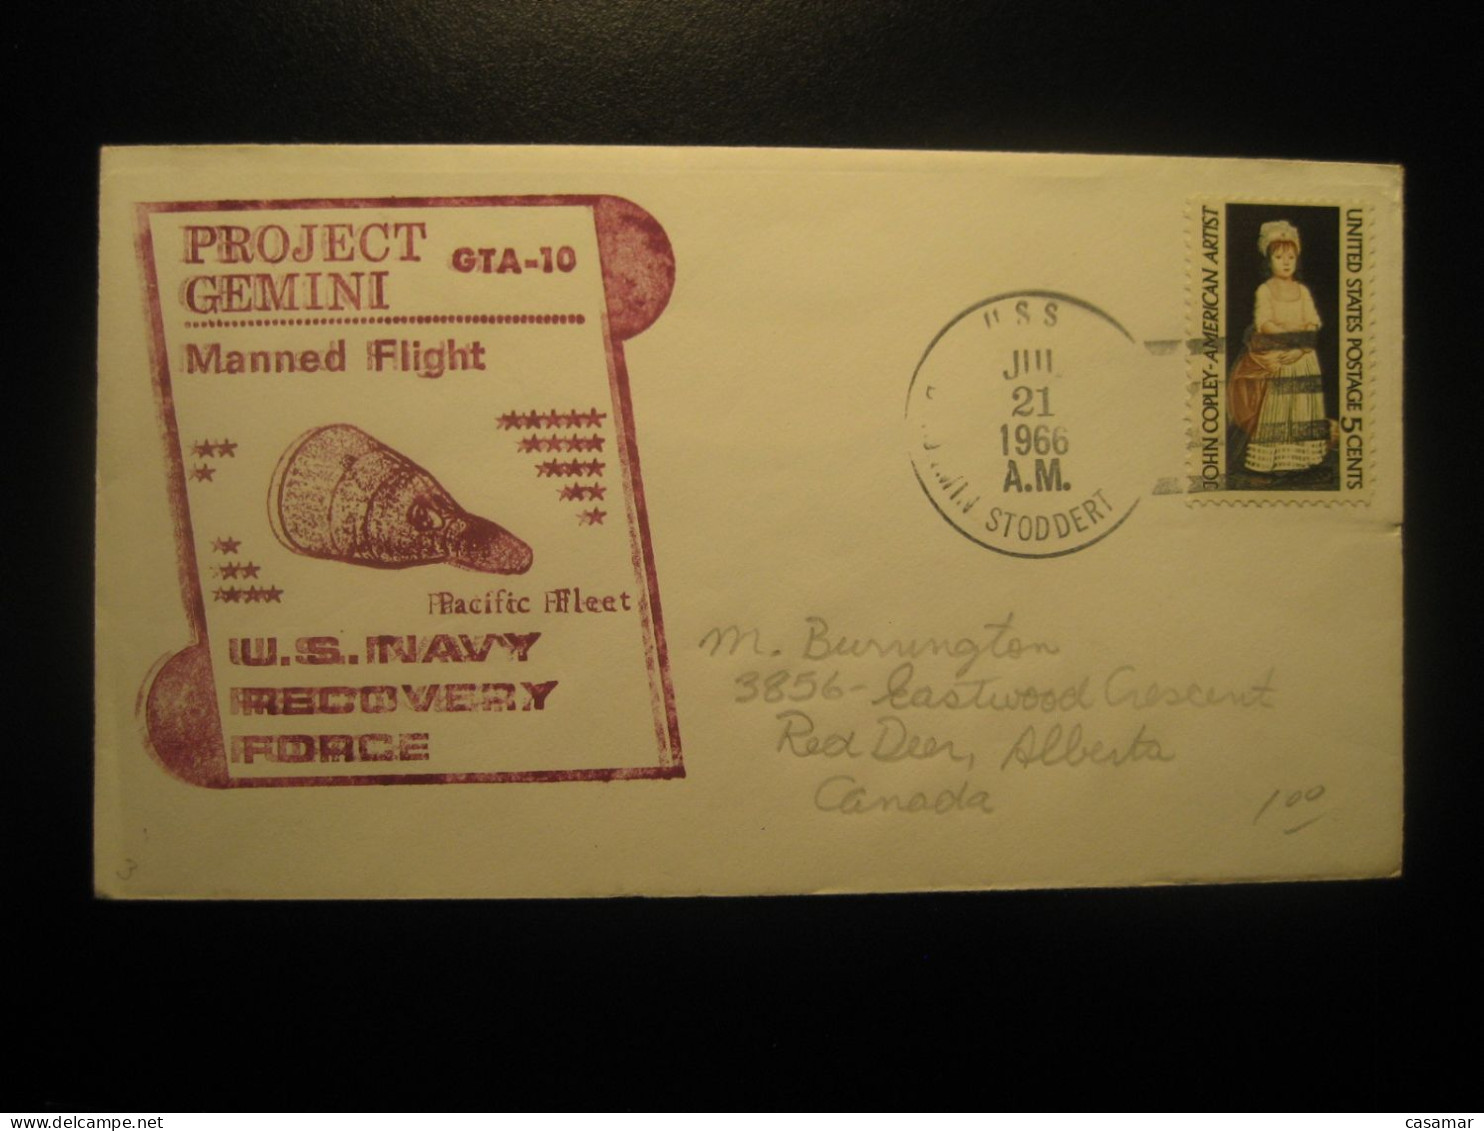 PROJECT GEMINI Pacific Fleet GTA10 Manned Flight US Navy Recovery Force USS STODDERT 1966 Cancel Cover USA Space Spatial - USA